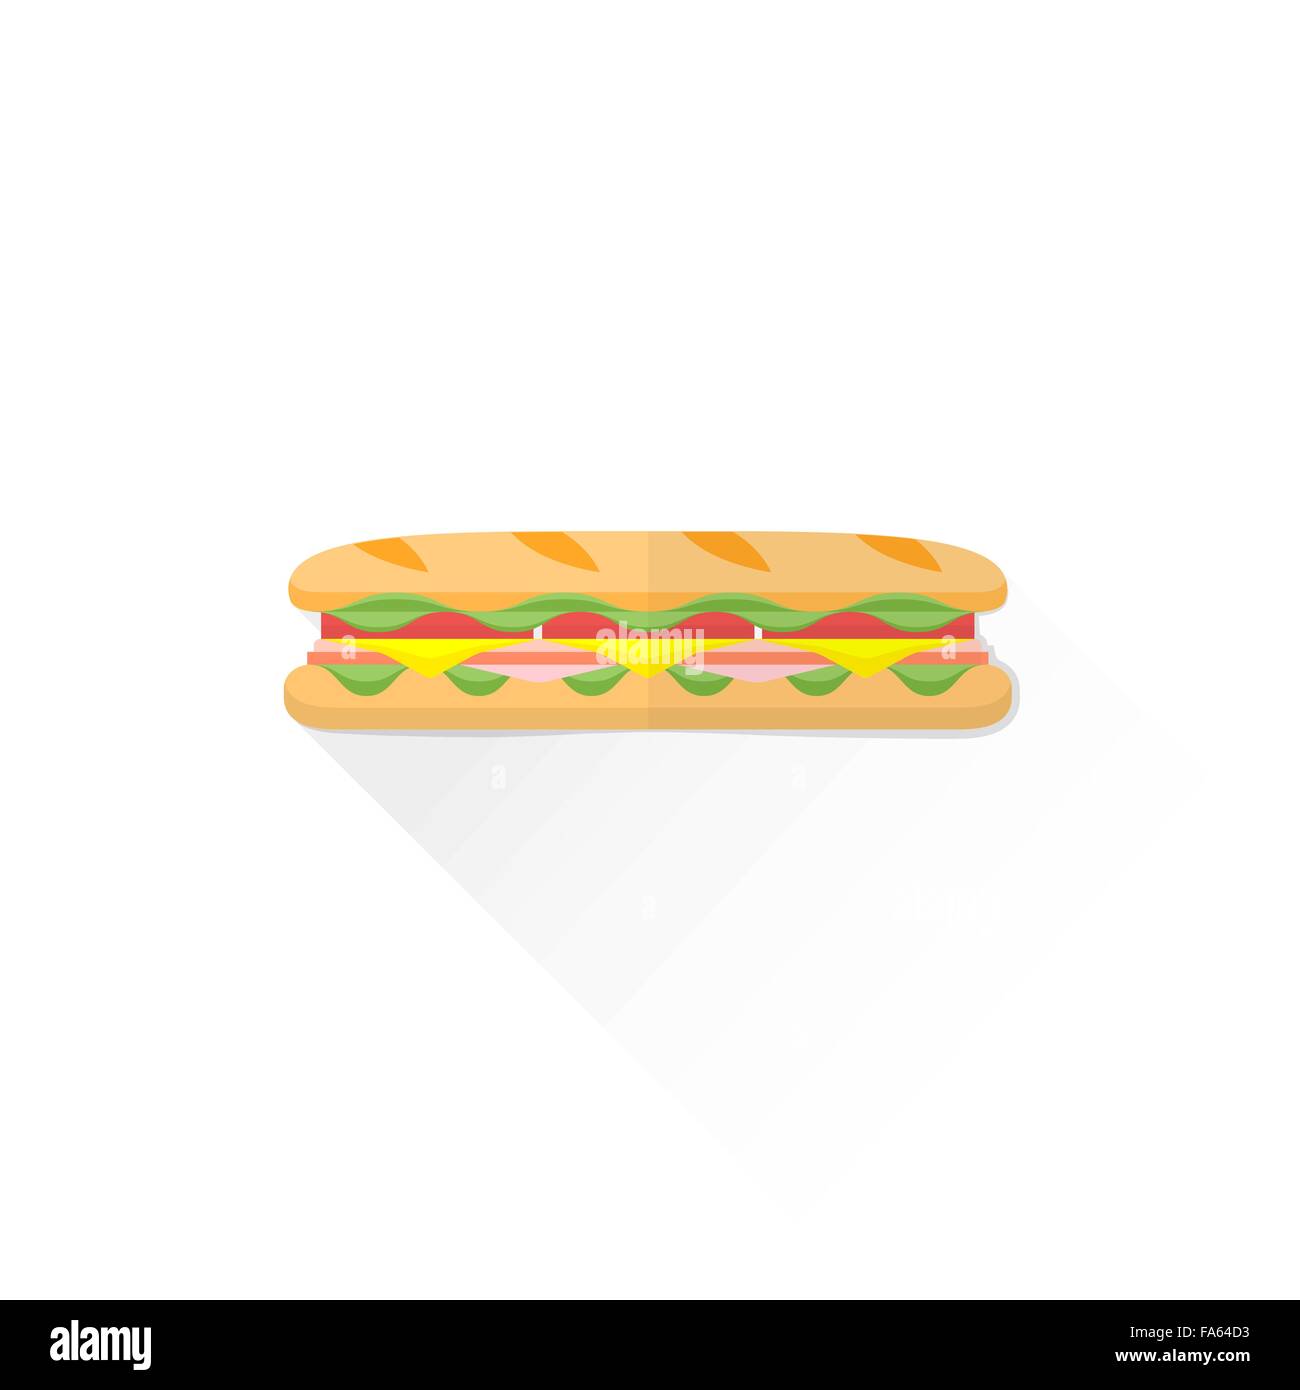 vector fast food baguette sandwich ham bacon lettuce tomato cheese flat design isolated illustration on white background with sh Stock Vector